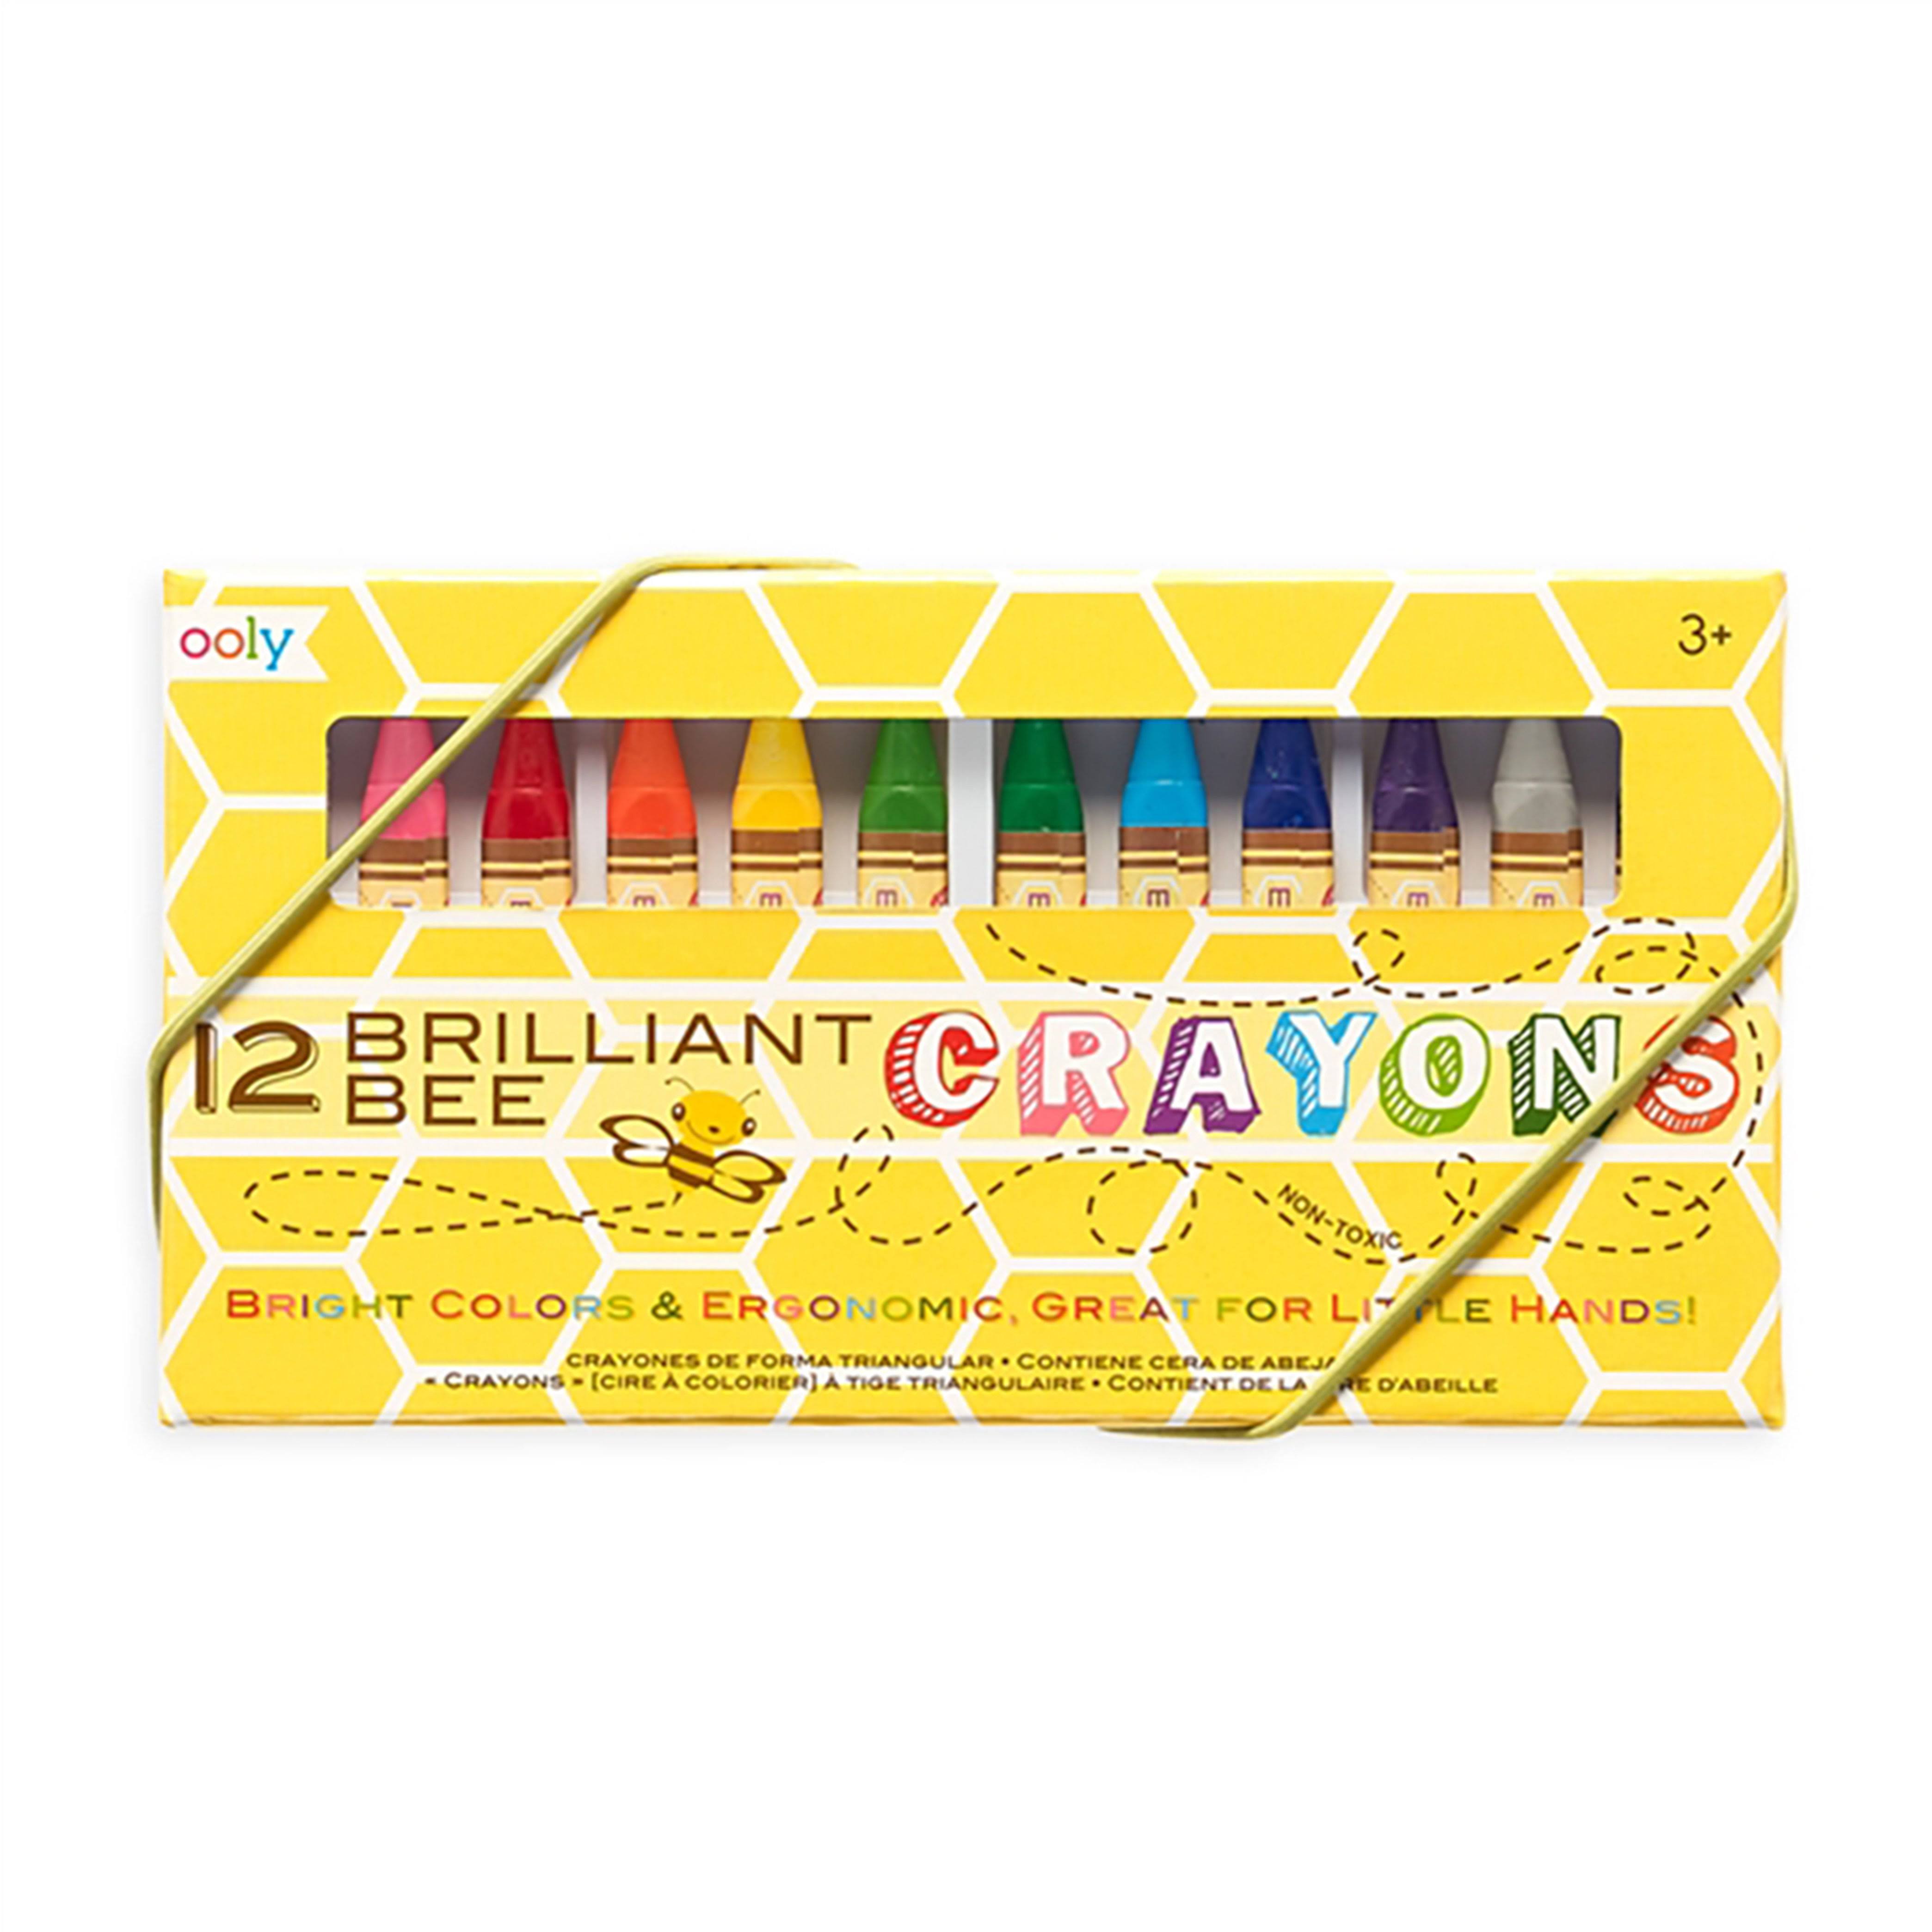 Brilliant Bee Crayons 12 Pack